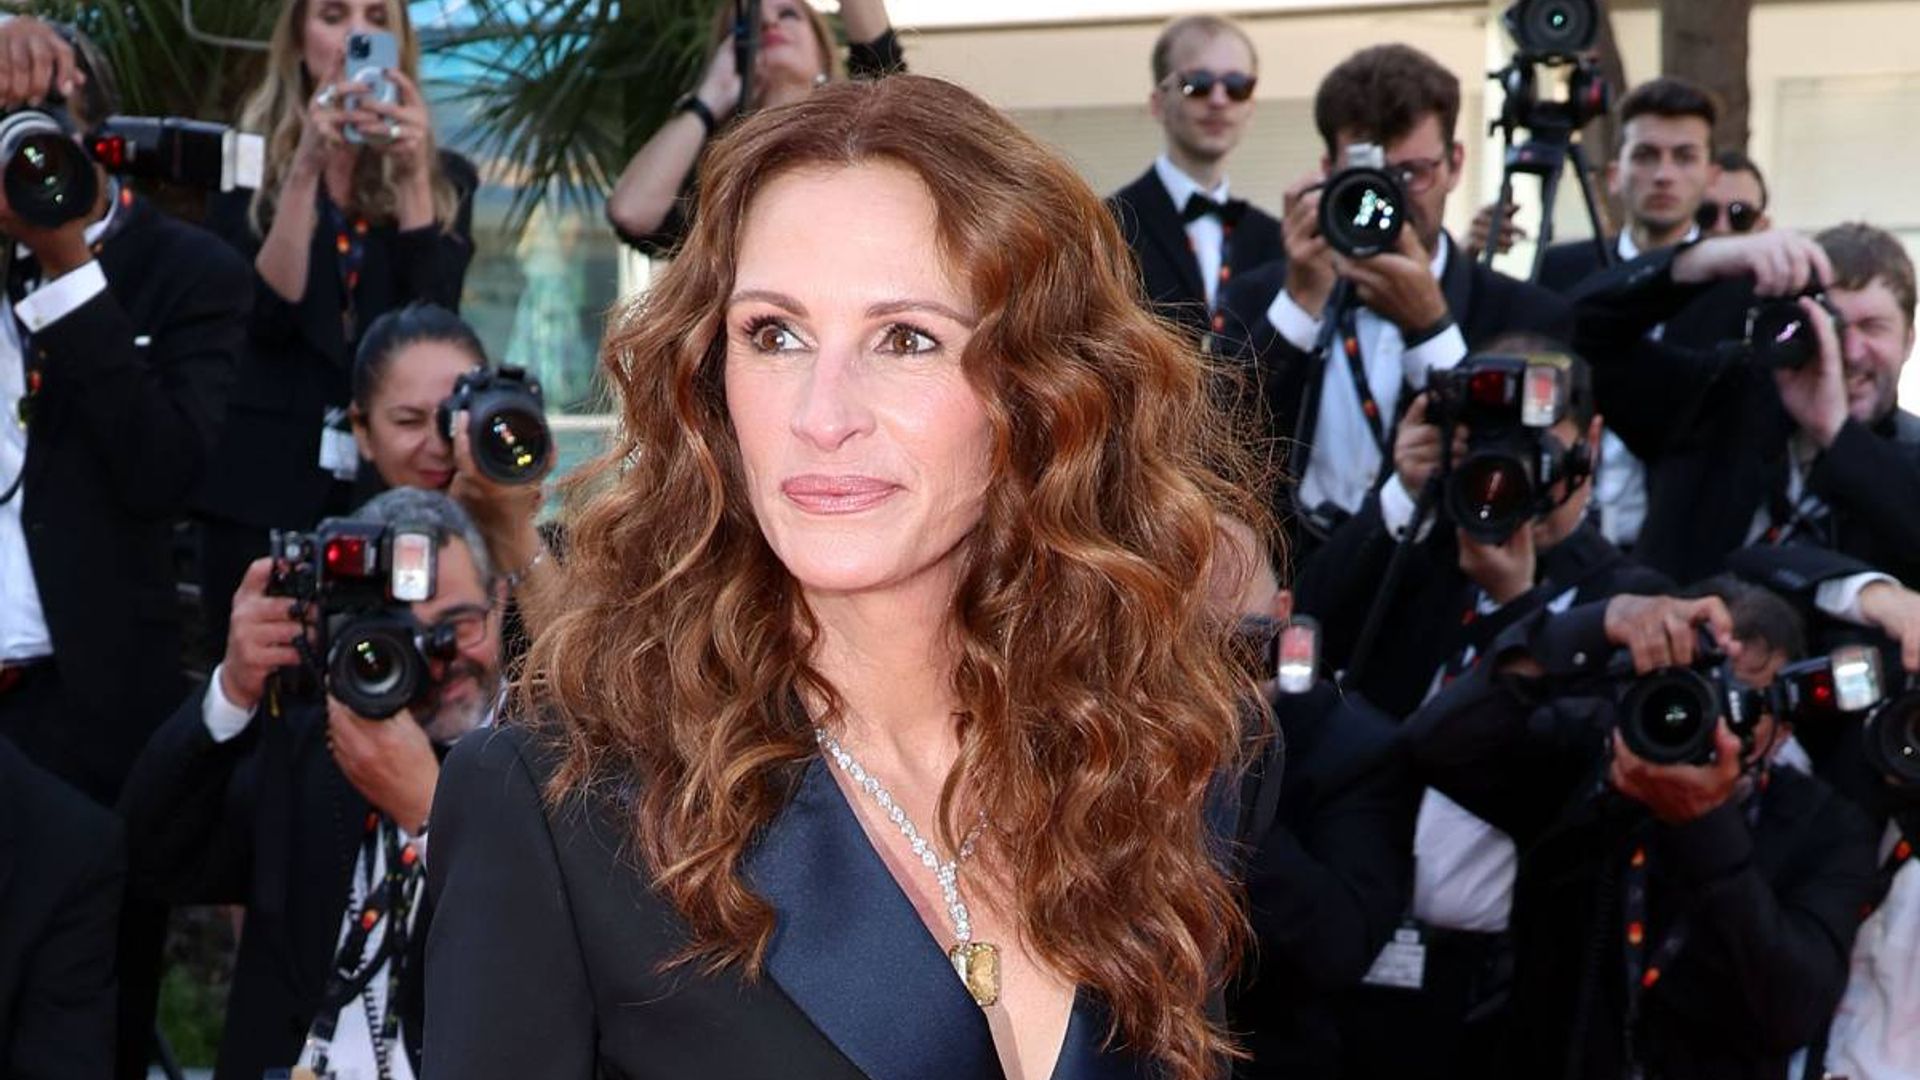 Julia Roberts reveals hilarious way she's 'recovering' as she pokes fun at grueling itinerary